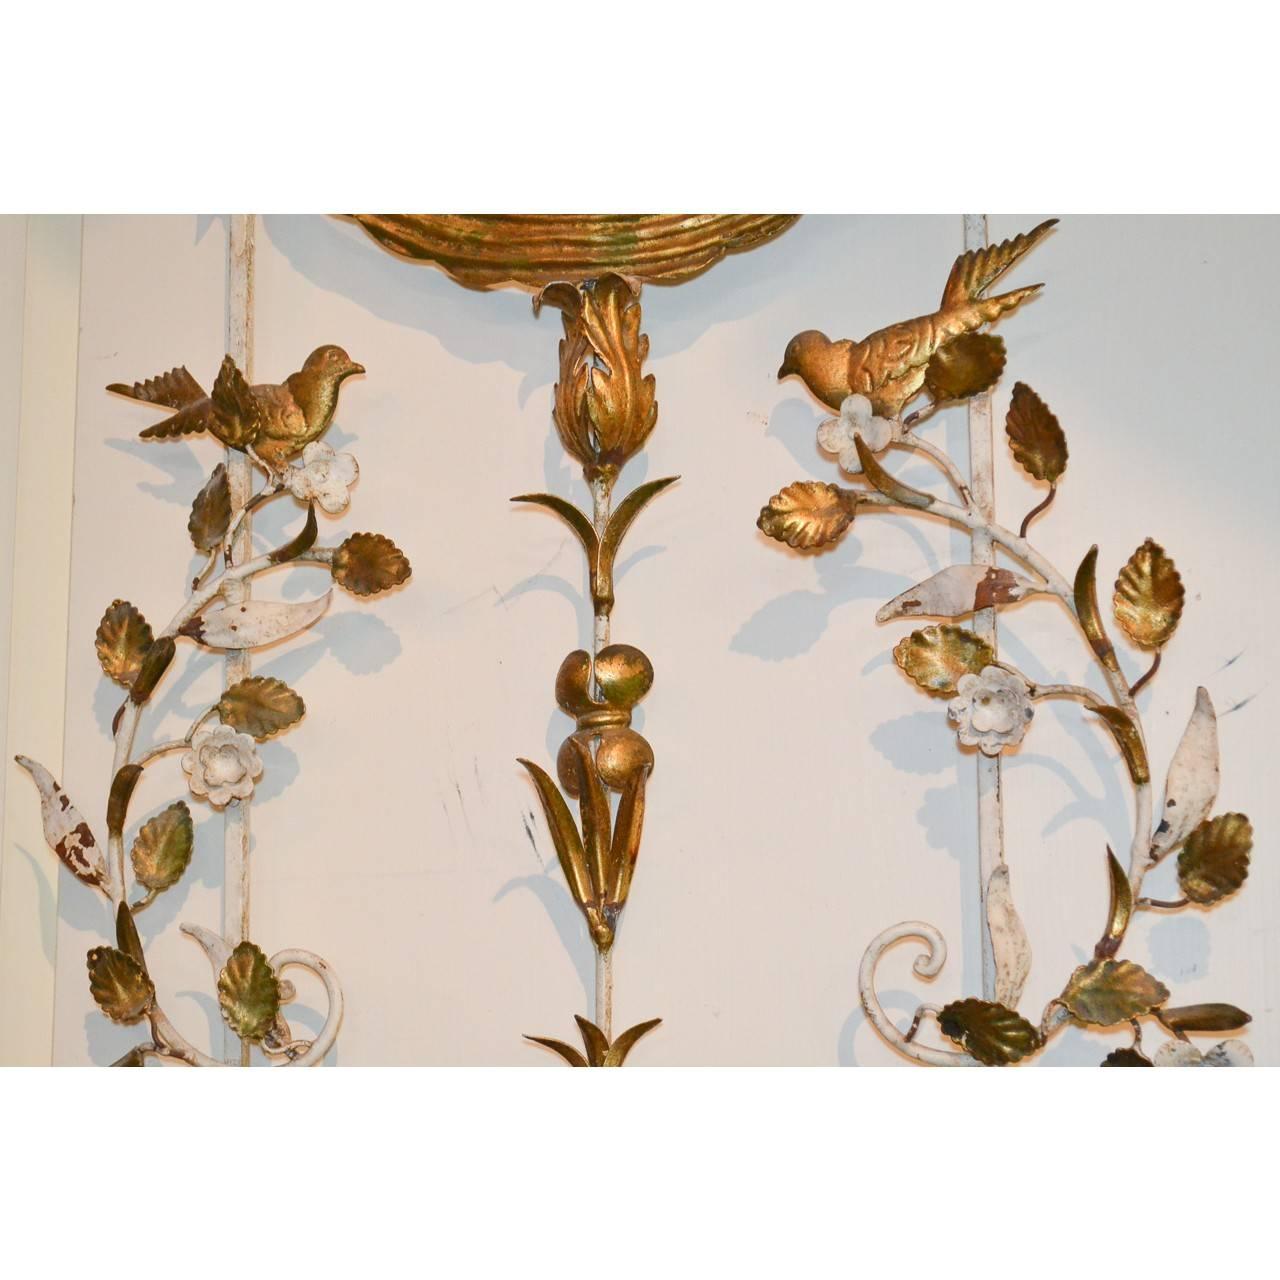 Early 20th Century 1920s Exceptional Parisian Metal Candelabra Sconce